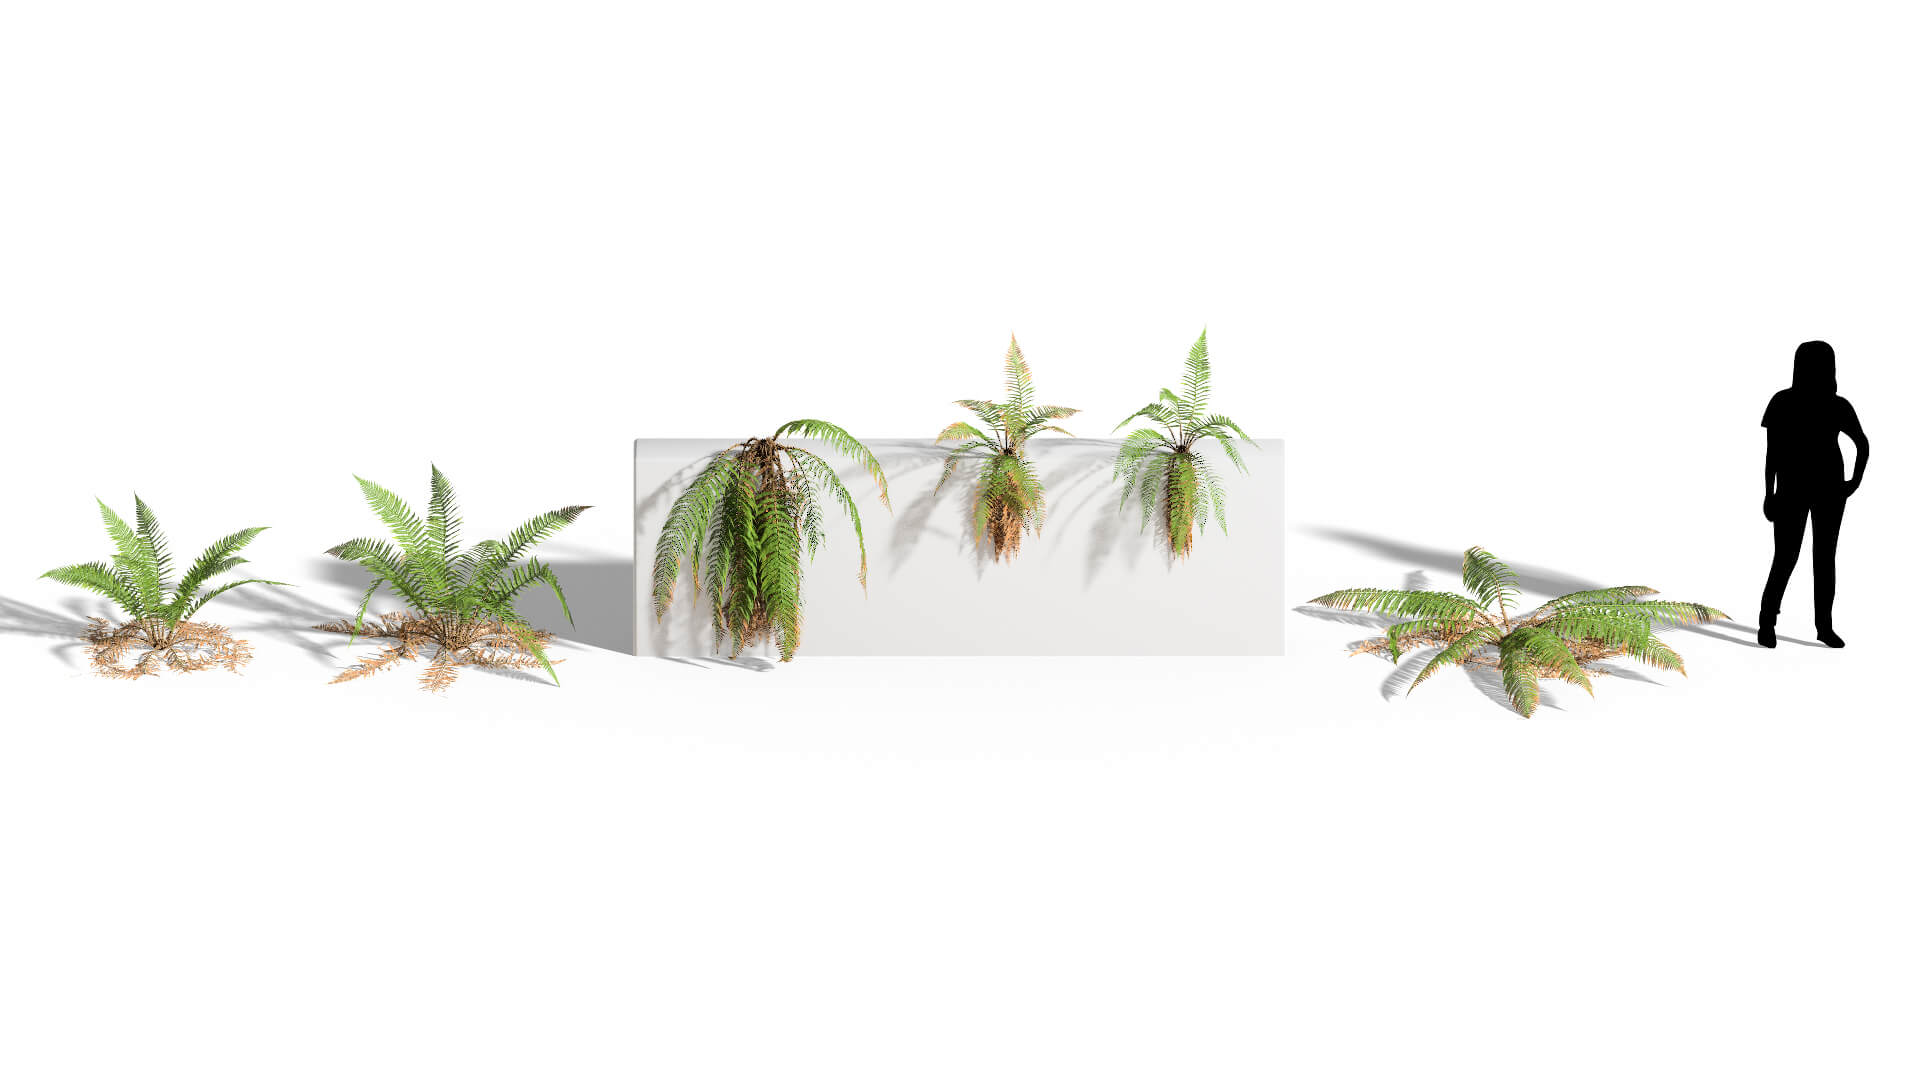 3D model of the Male fern Dryopteris filix-mas different presets